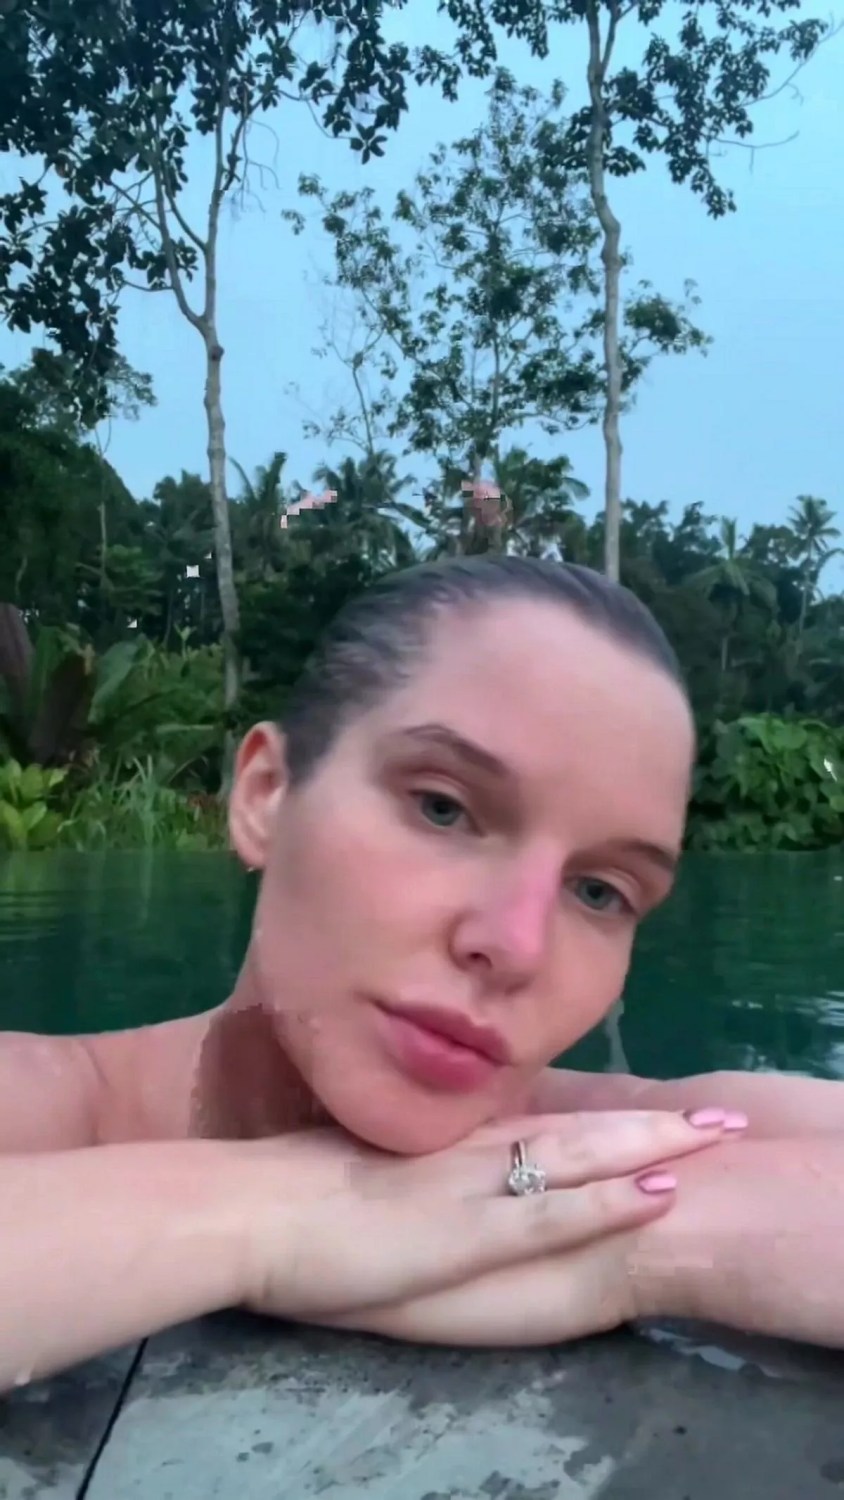 Helen Flanagan Goes For A Bold Skinny Dip In Pool After Revealing 'Burnt Boobs'